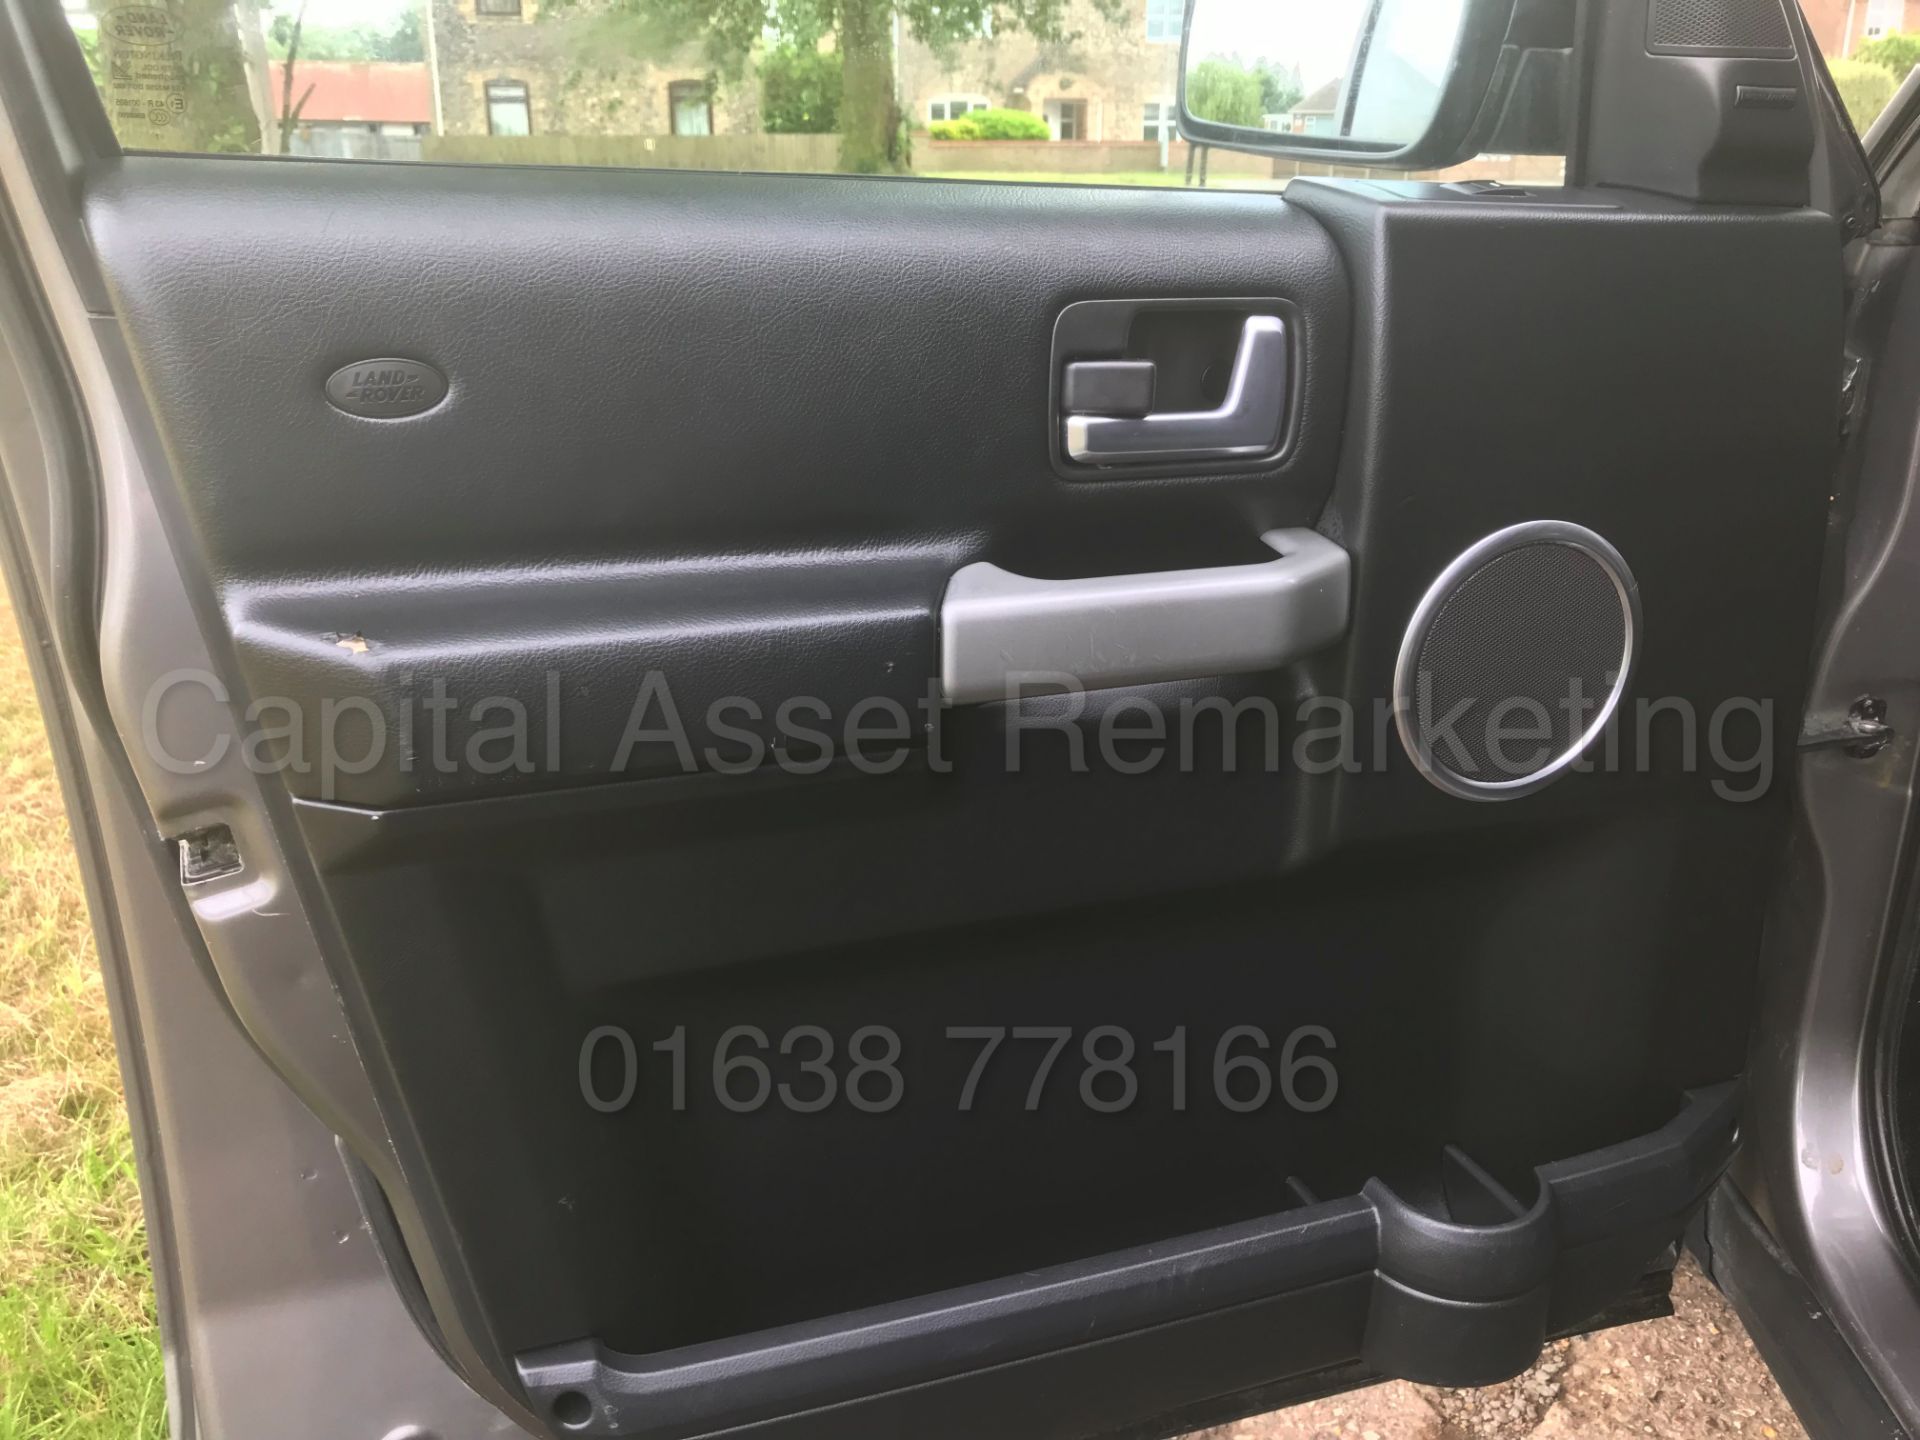 (On Sale) LAND ROVER DISCOVERY 3 'XS EDITION' **COMMERCIAL VAN**(2008 MODEL) 'TDV6-190 BHP' (NO VAT) - Image 18 of 38